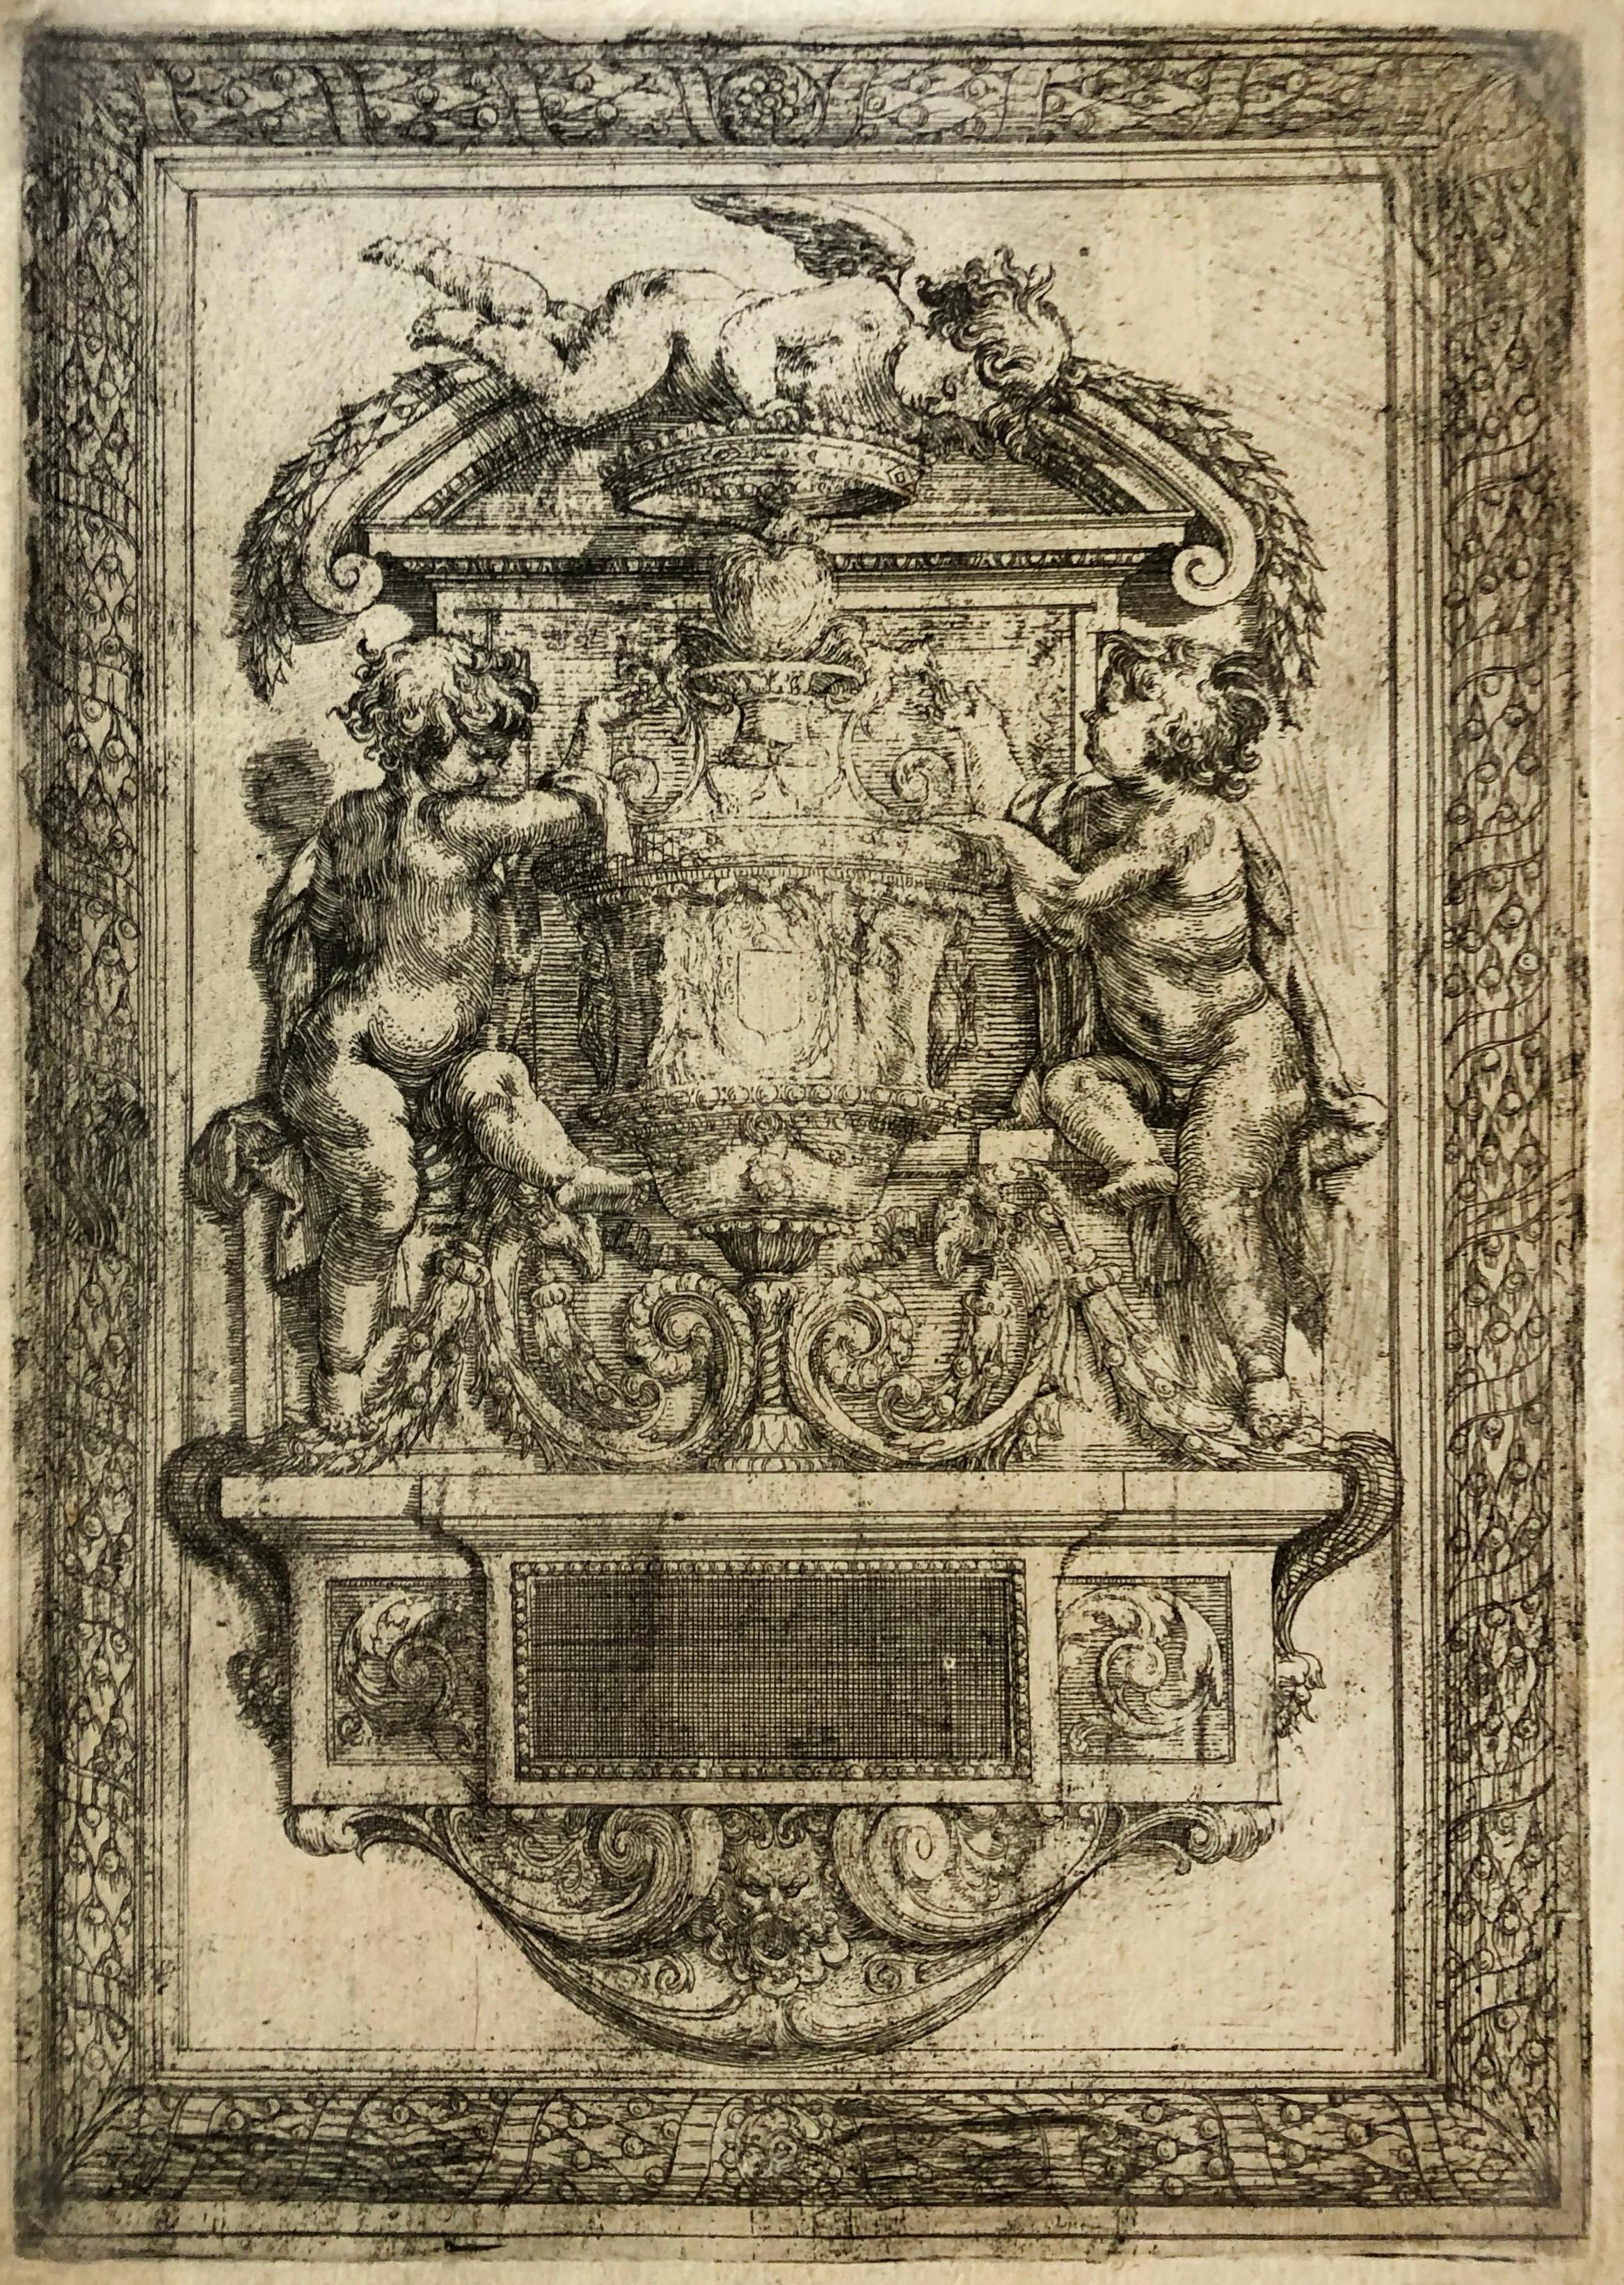 Study of an architectural devotional with a Sacred Heart and three Putti